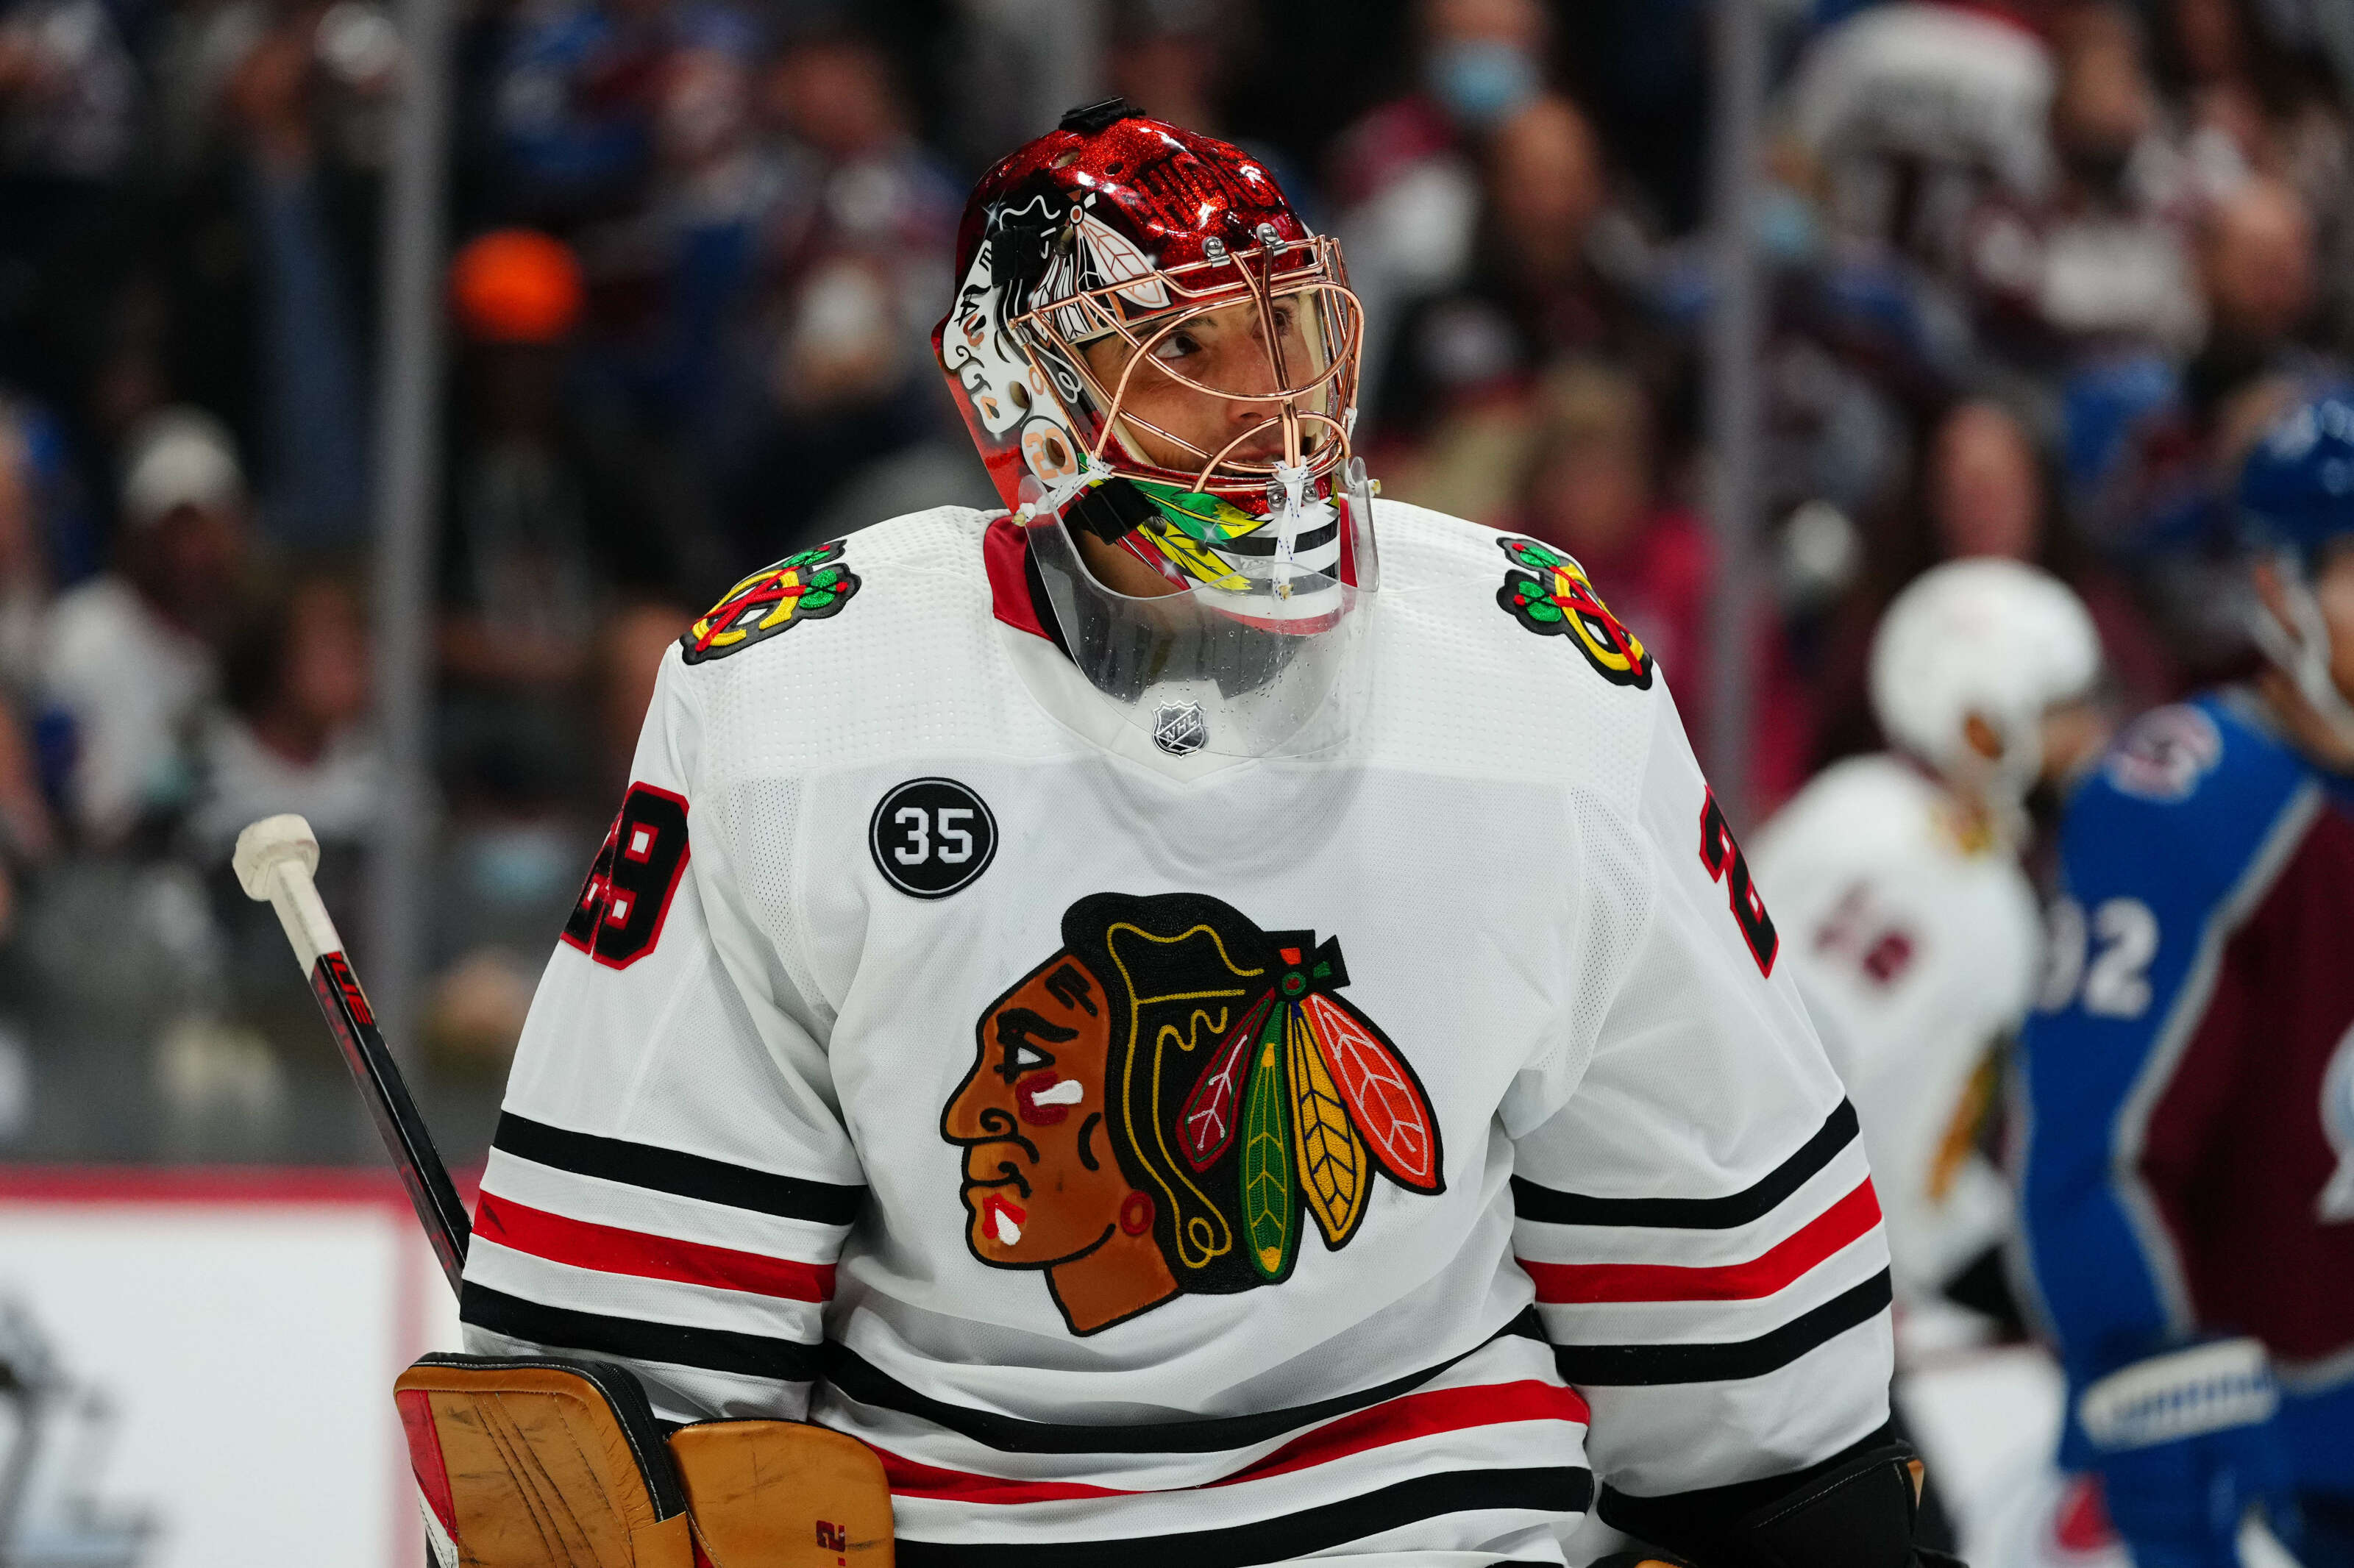 Blackhawks: Where will Marc-Andre Fleury end up?